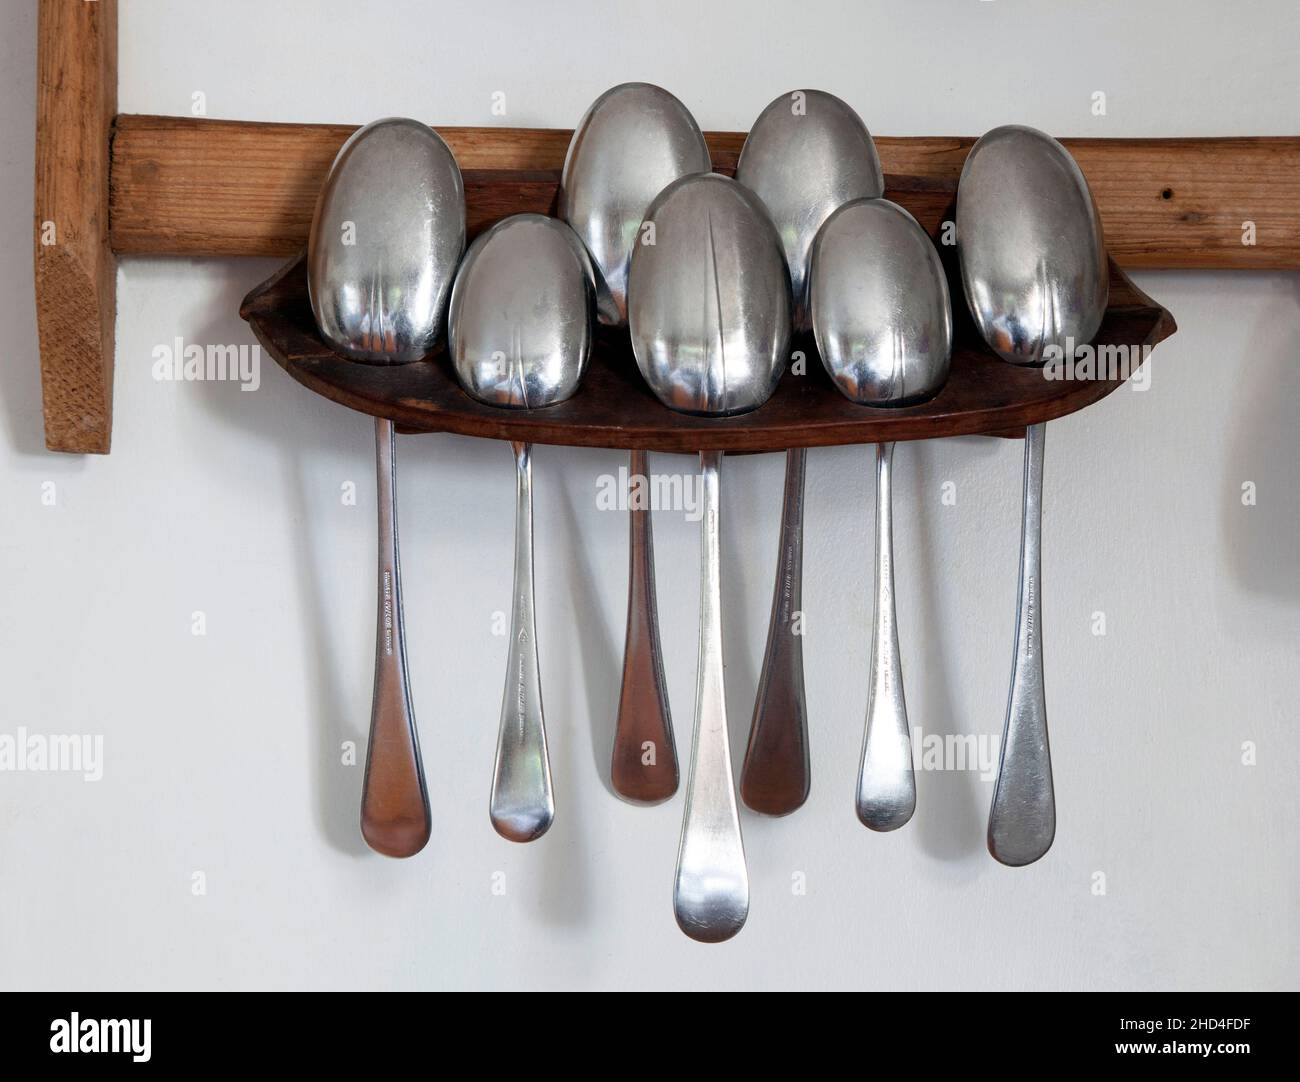 Antique spoon rack in country kitchen Stock Photo